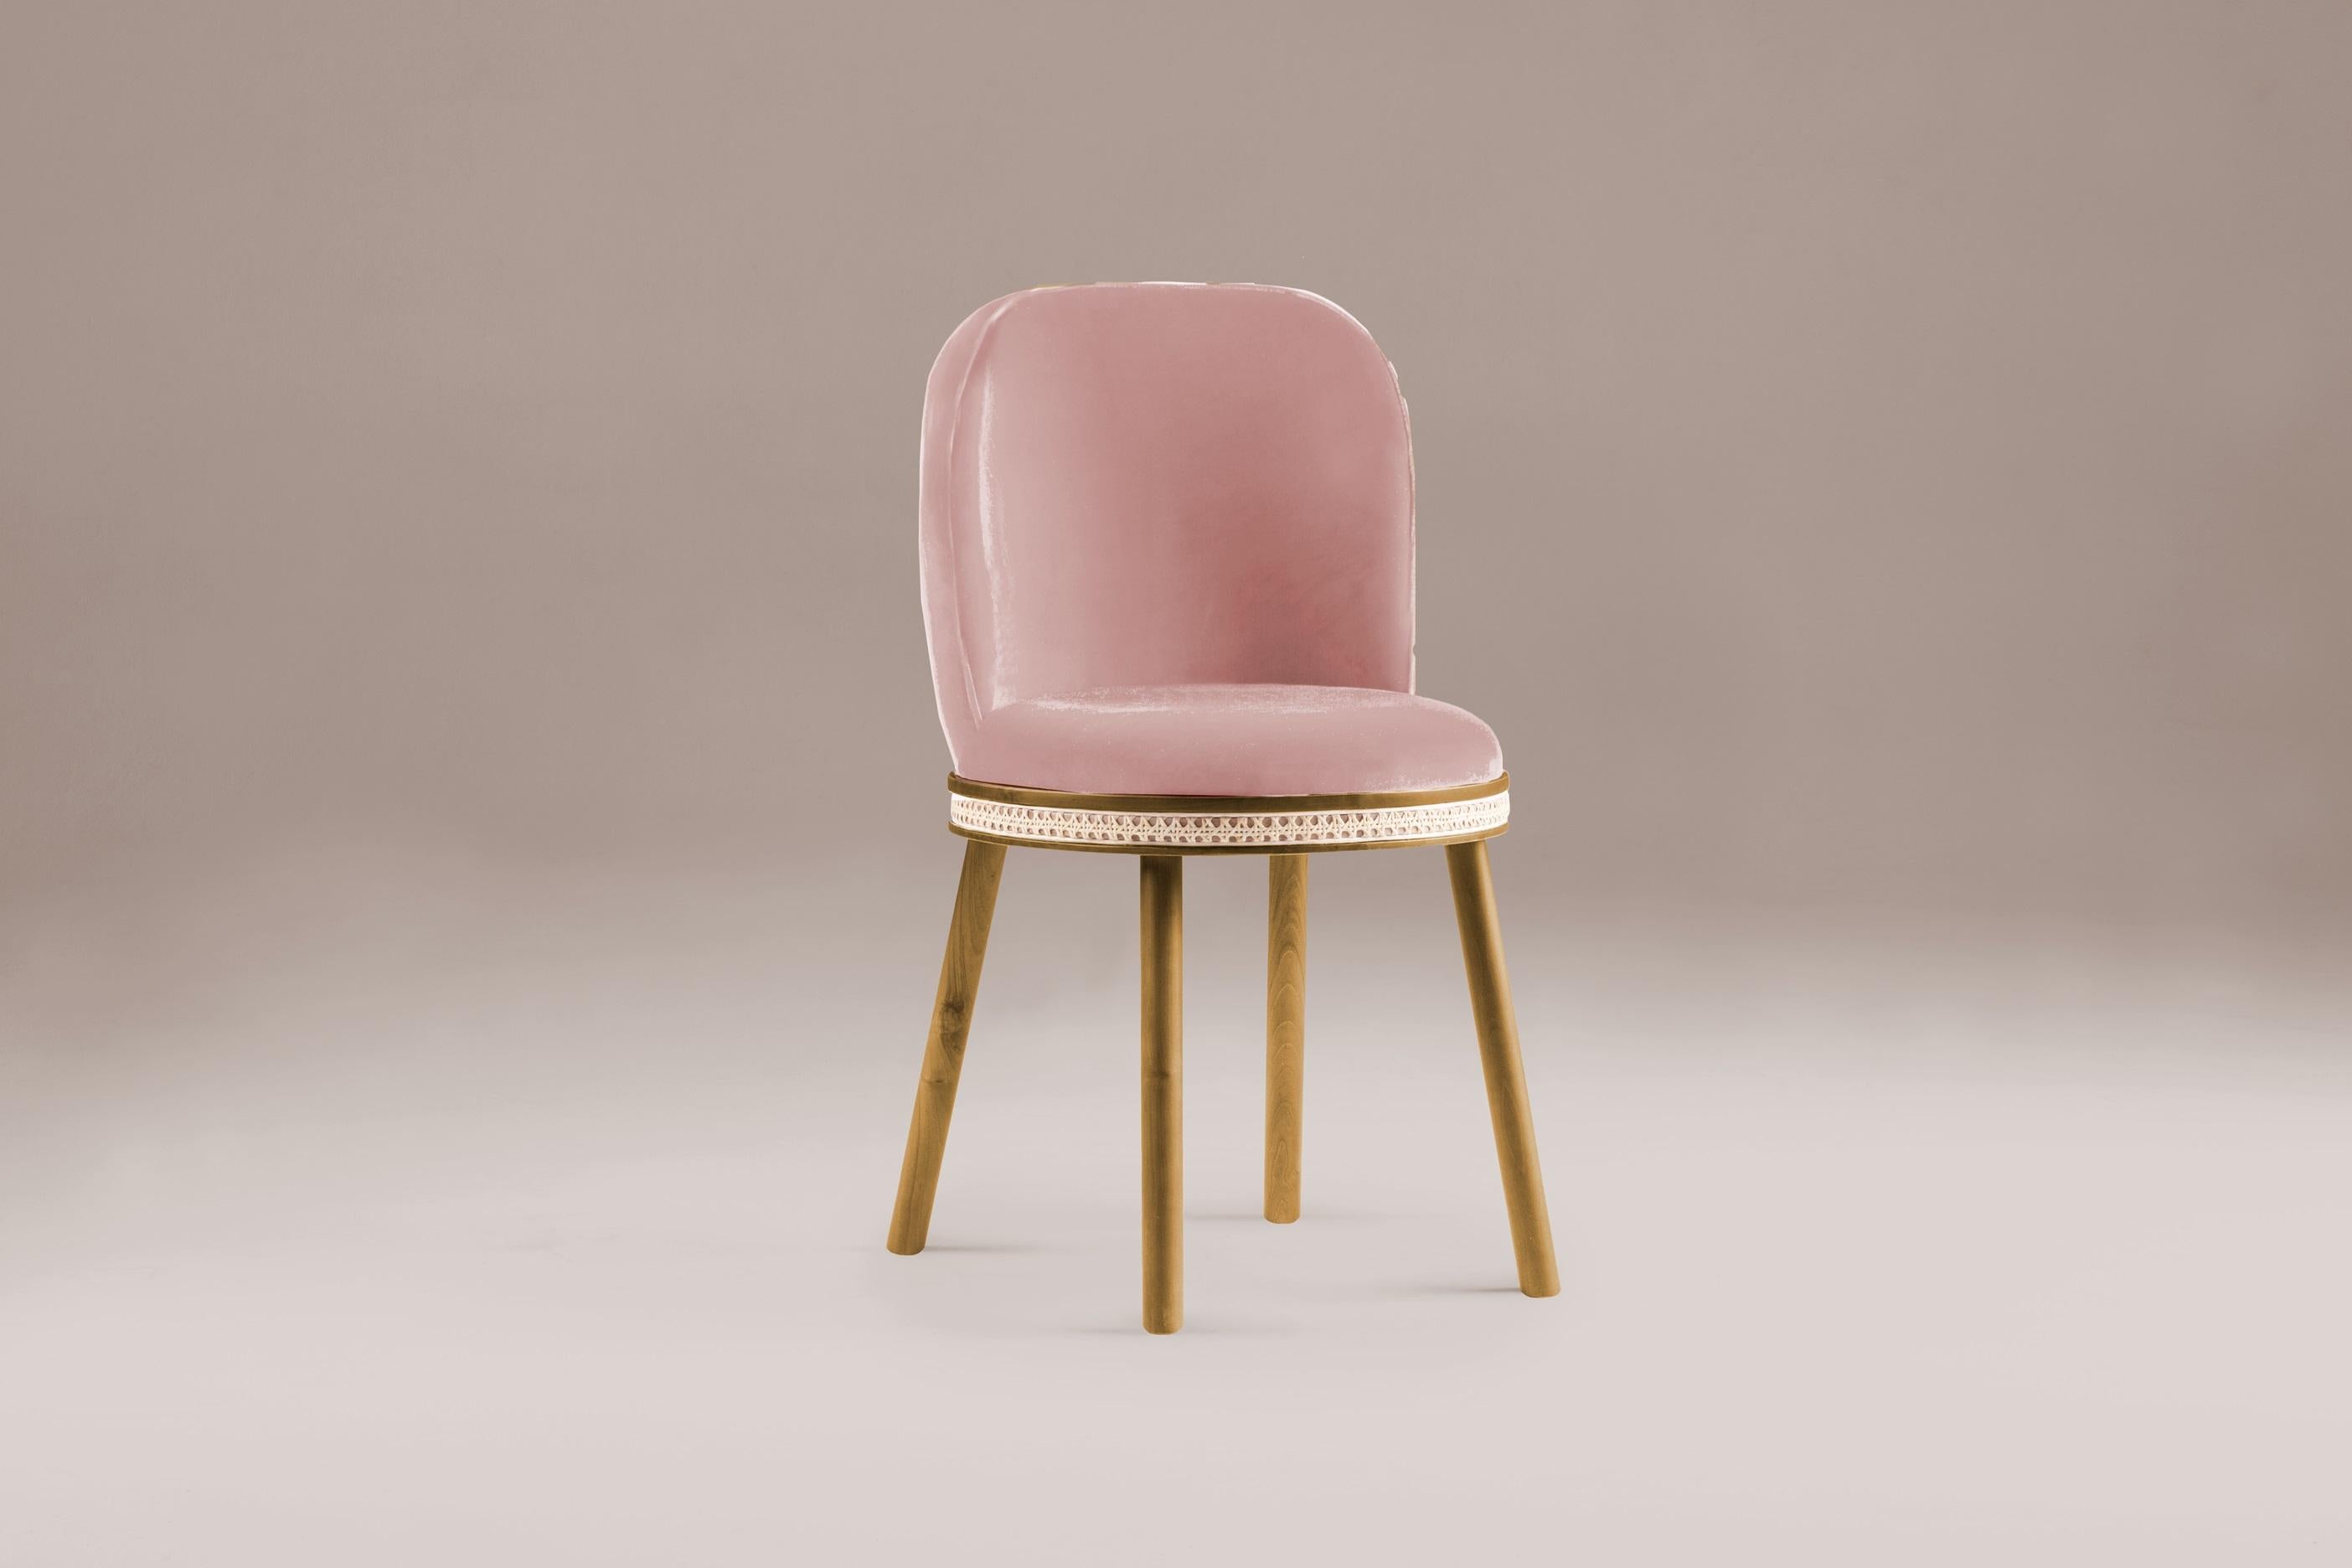 DOOQ Dining Chair Alma with Pink Velvet and Walnut Wood Mid-Century Modern.
The Alma chair is costumizable in different fabric option and wood finishiings.
In a piece that combines classic and modern aesthetics we can find a certain harmonic